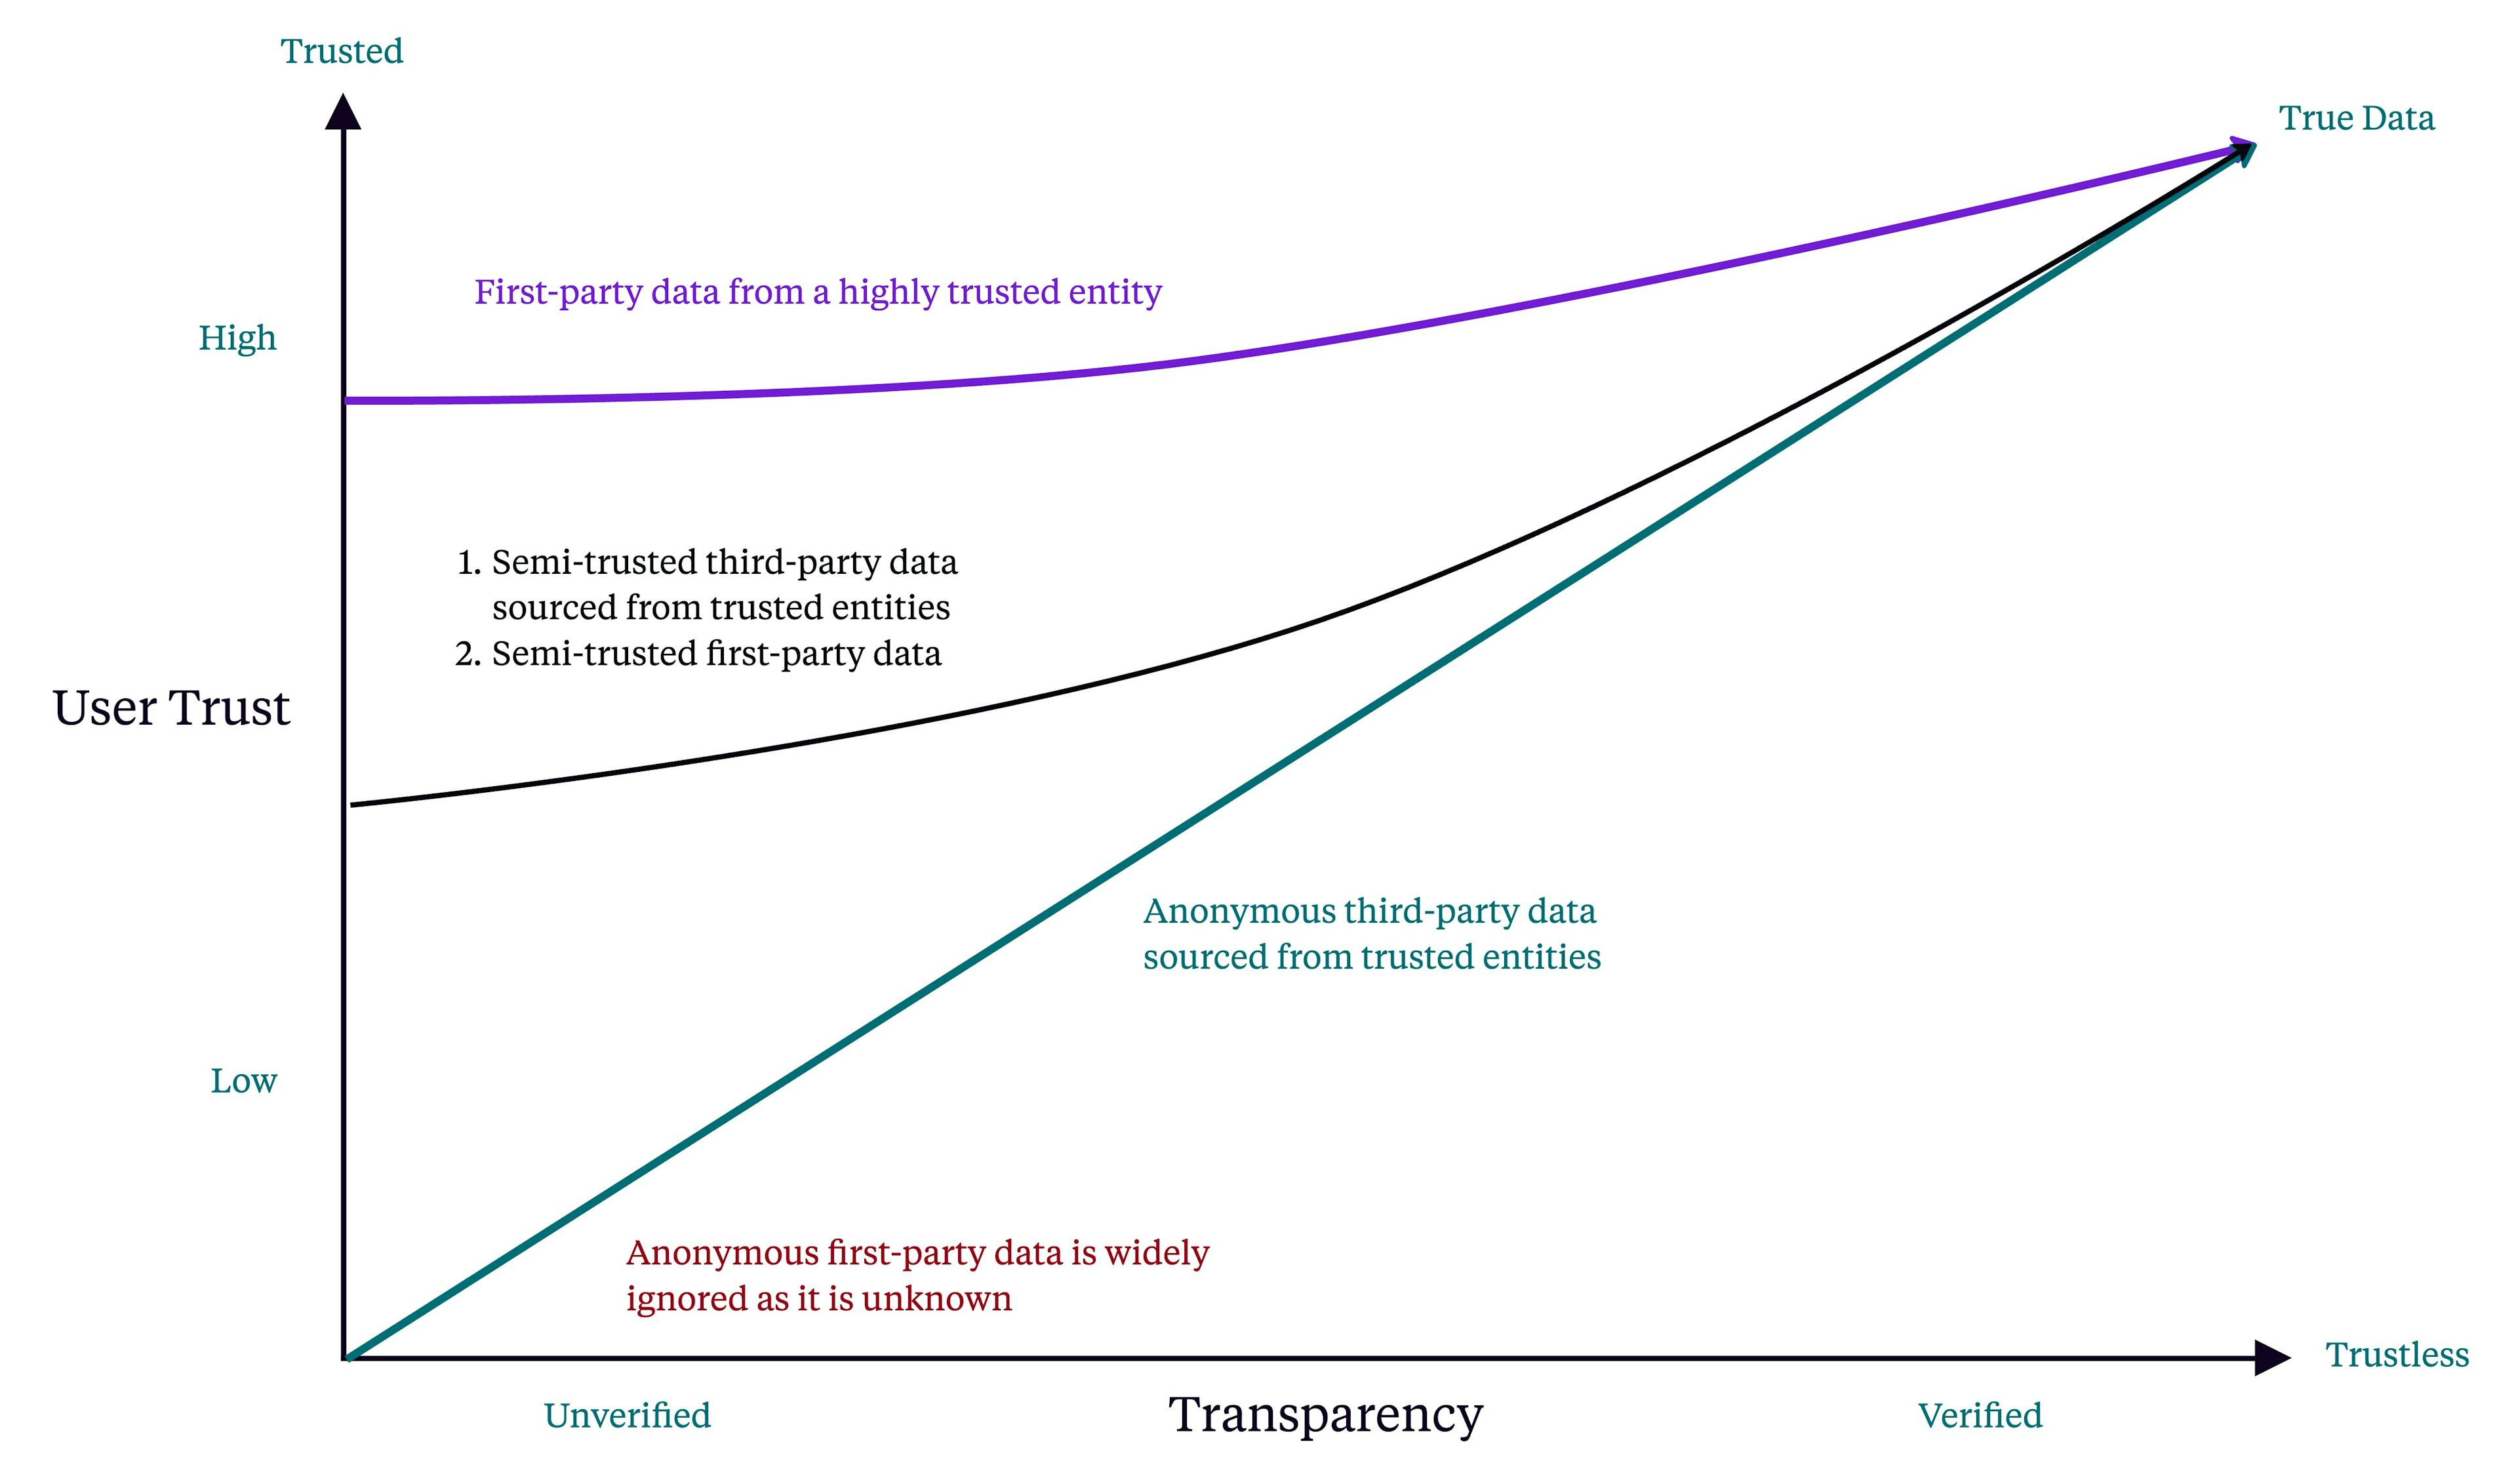 Illustrating how trust in data varies based on whether it is first-party or third-party and its source context. The graph highlights how transparency, especially when verified, minimises the trust required in technological outcomes, thereby enhancing user trust in those outcomes.